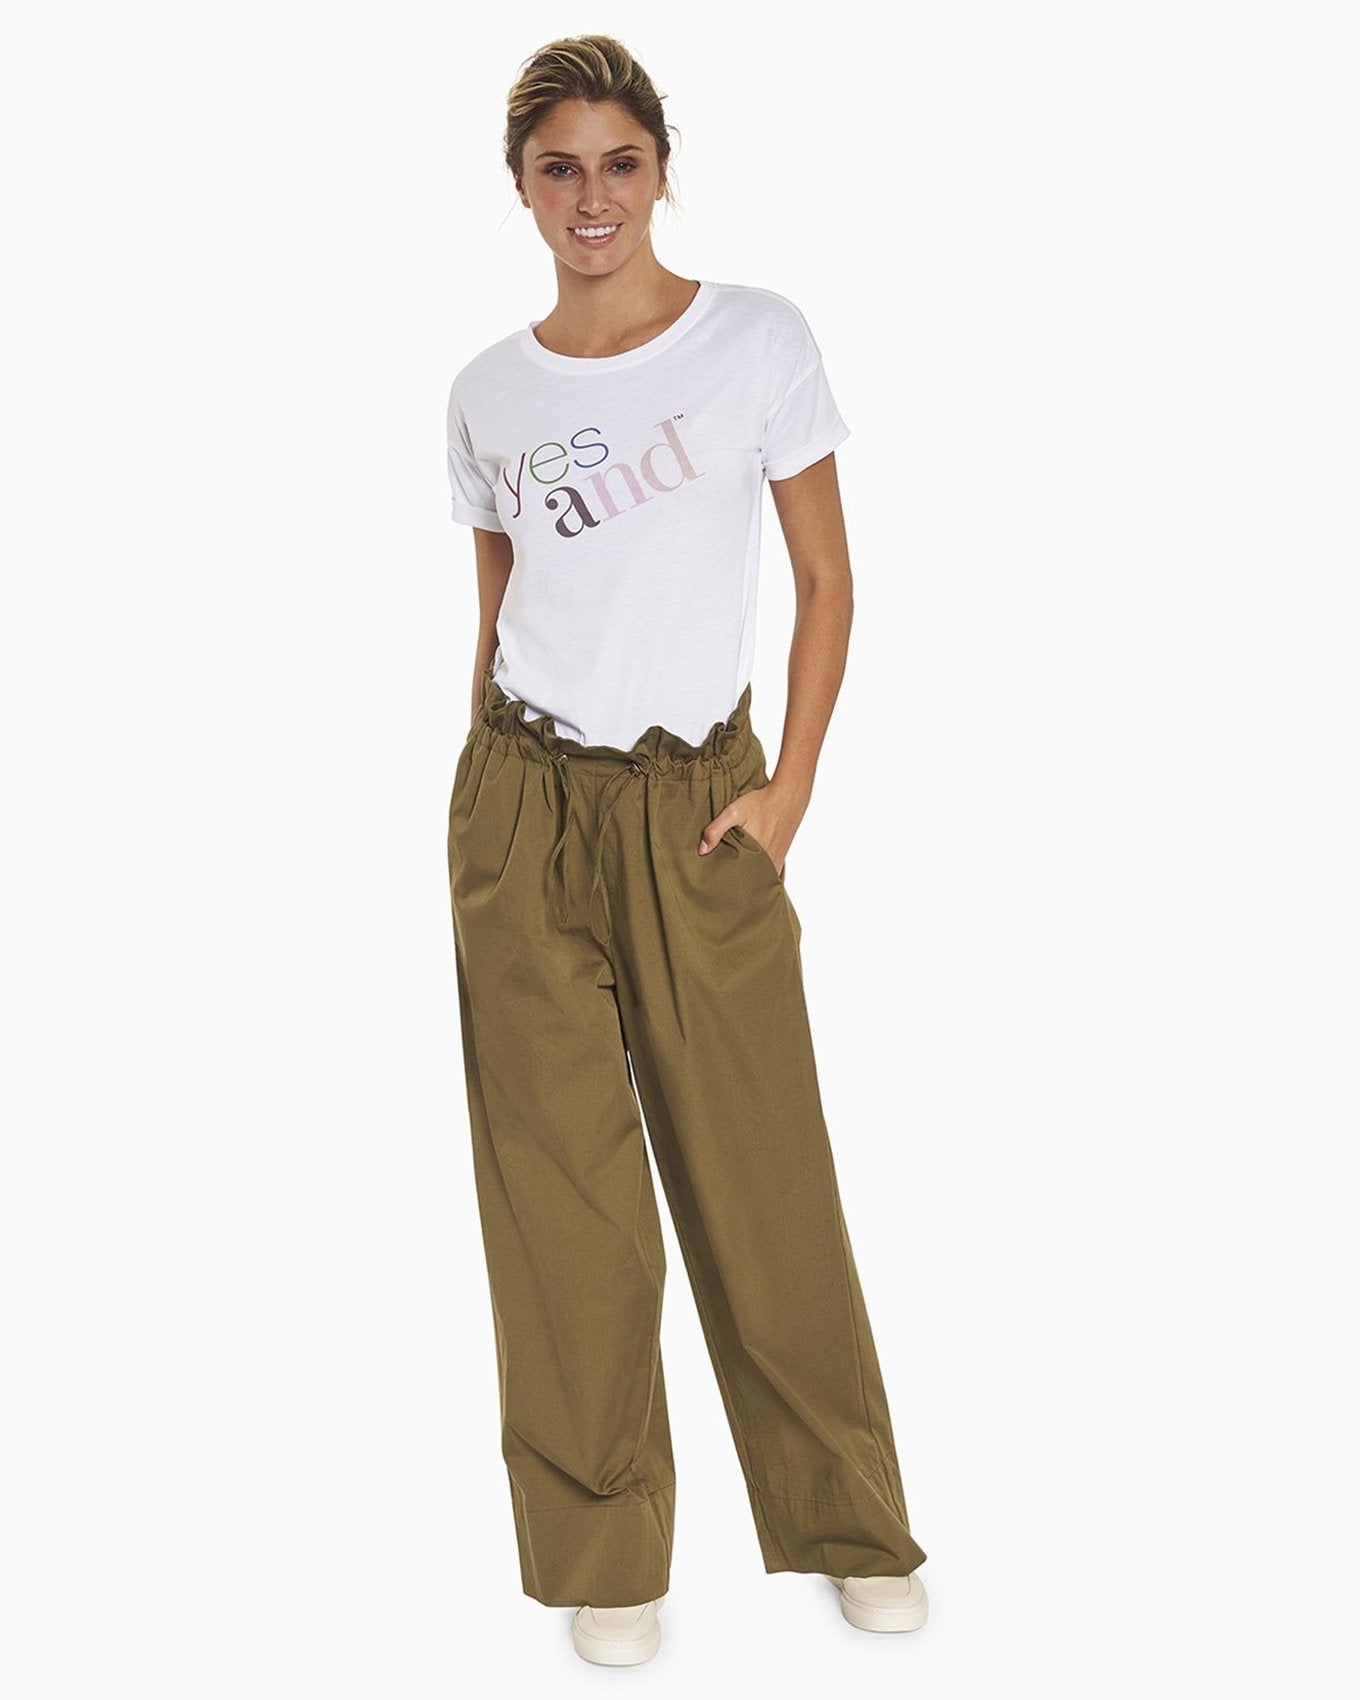 YesAnd Organic Paperbag Wide Leg Pant Wide Leg Pant in color Olive Branch and shape pants